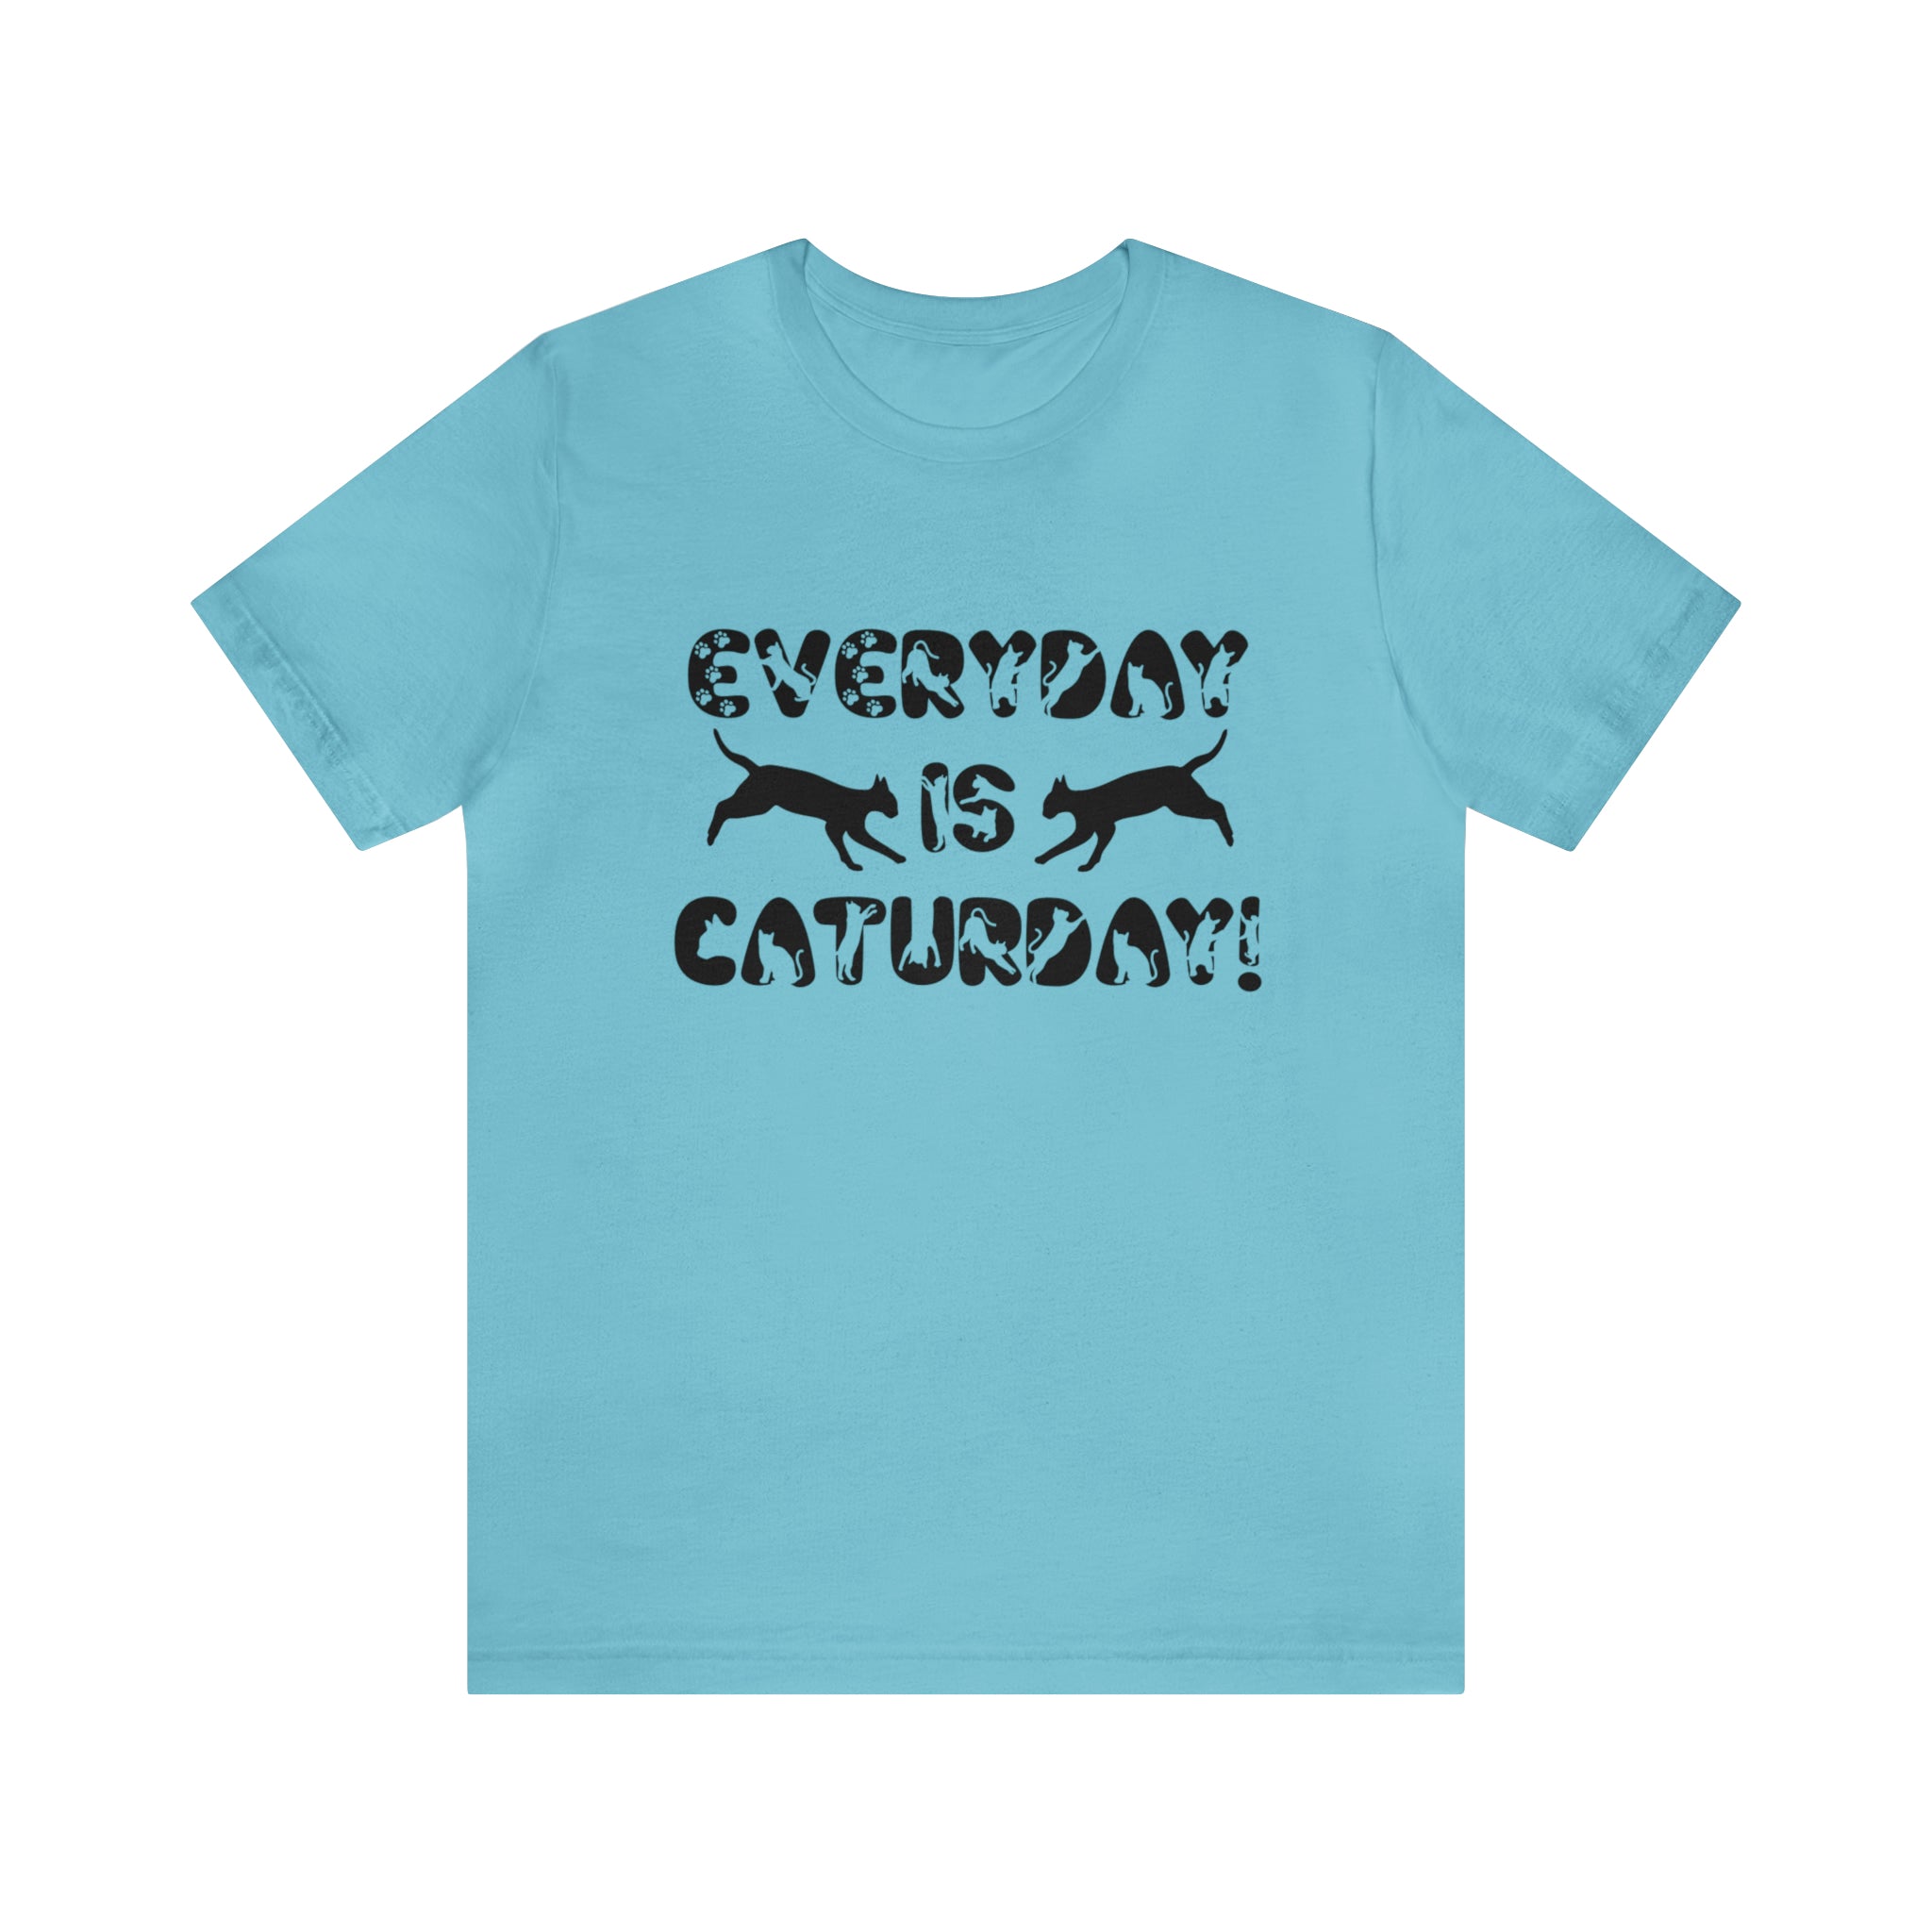 Everyday is caturday t-shirt Turquoise